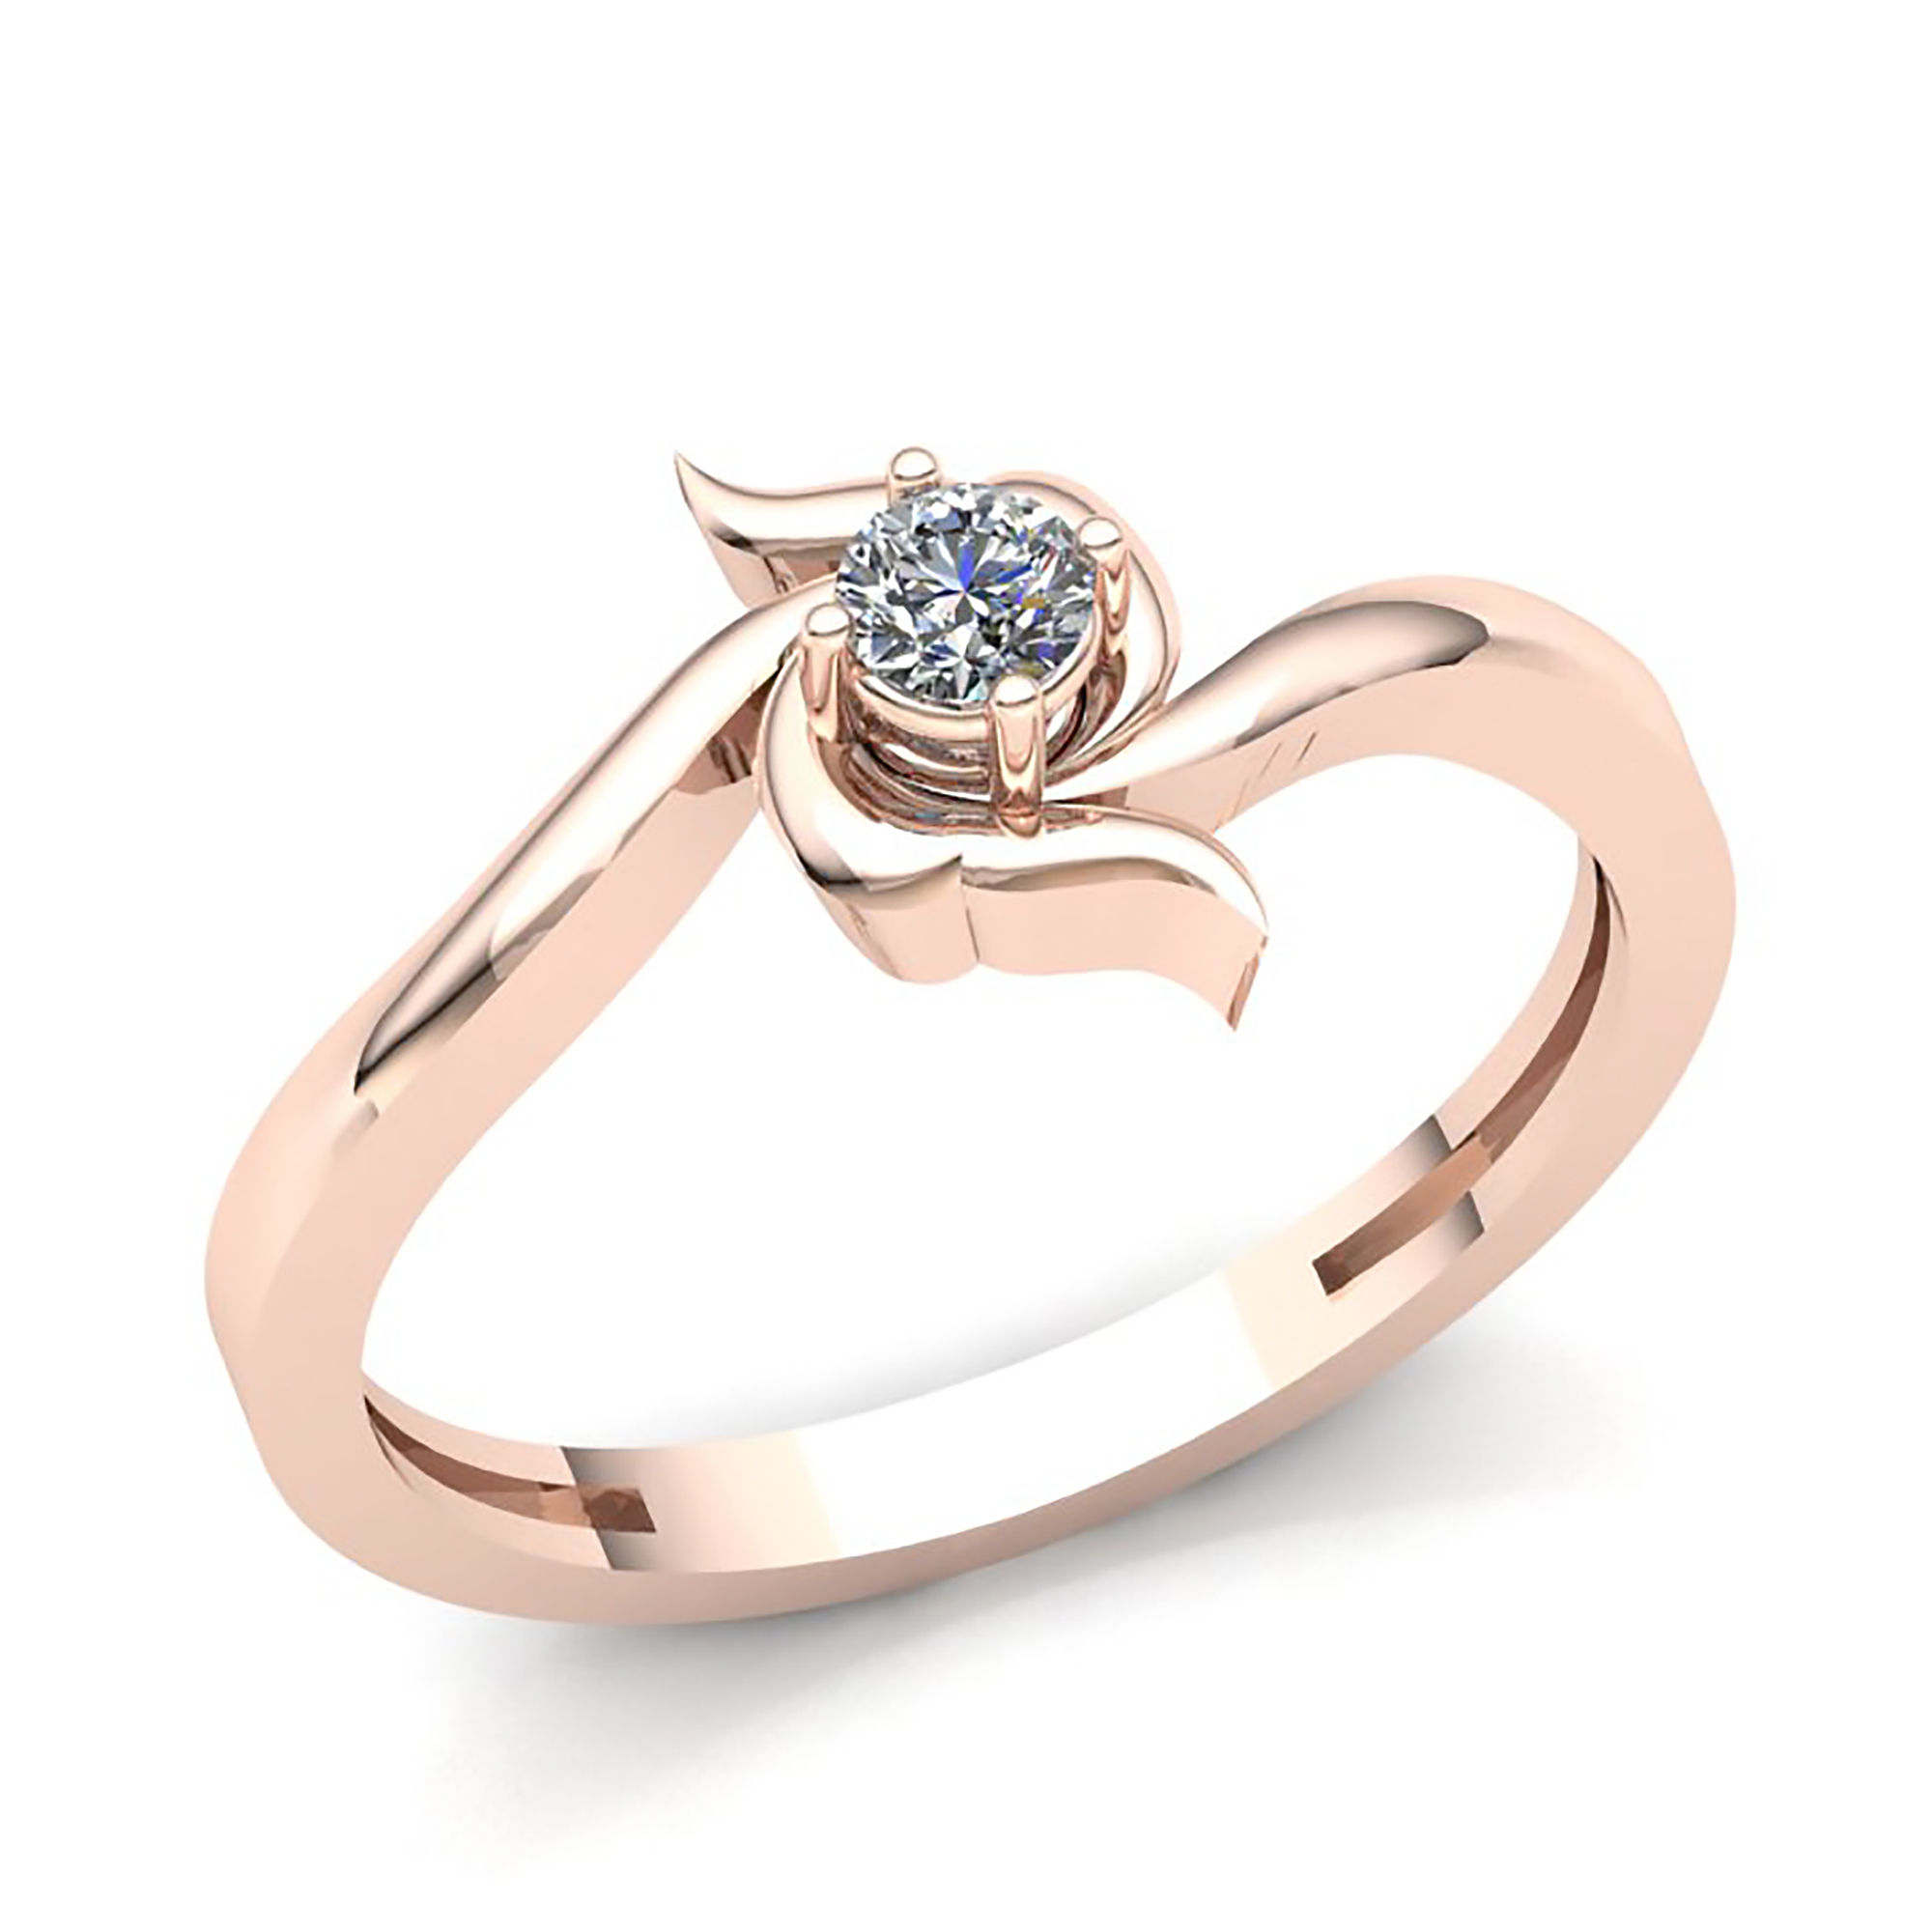 ROUND CUT DIAMOND SOLITAIRE ENGAGEMENT RING 14K ROSE GOLD JEWELRY 0.25 ct D/VS 